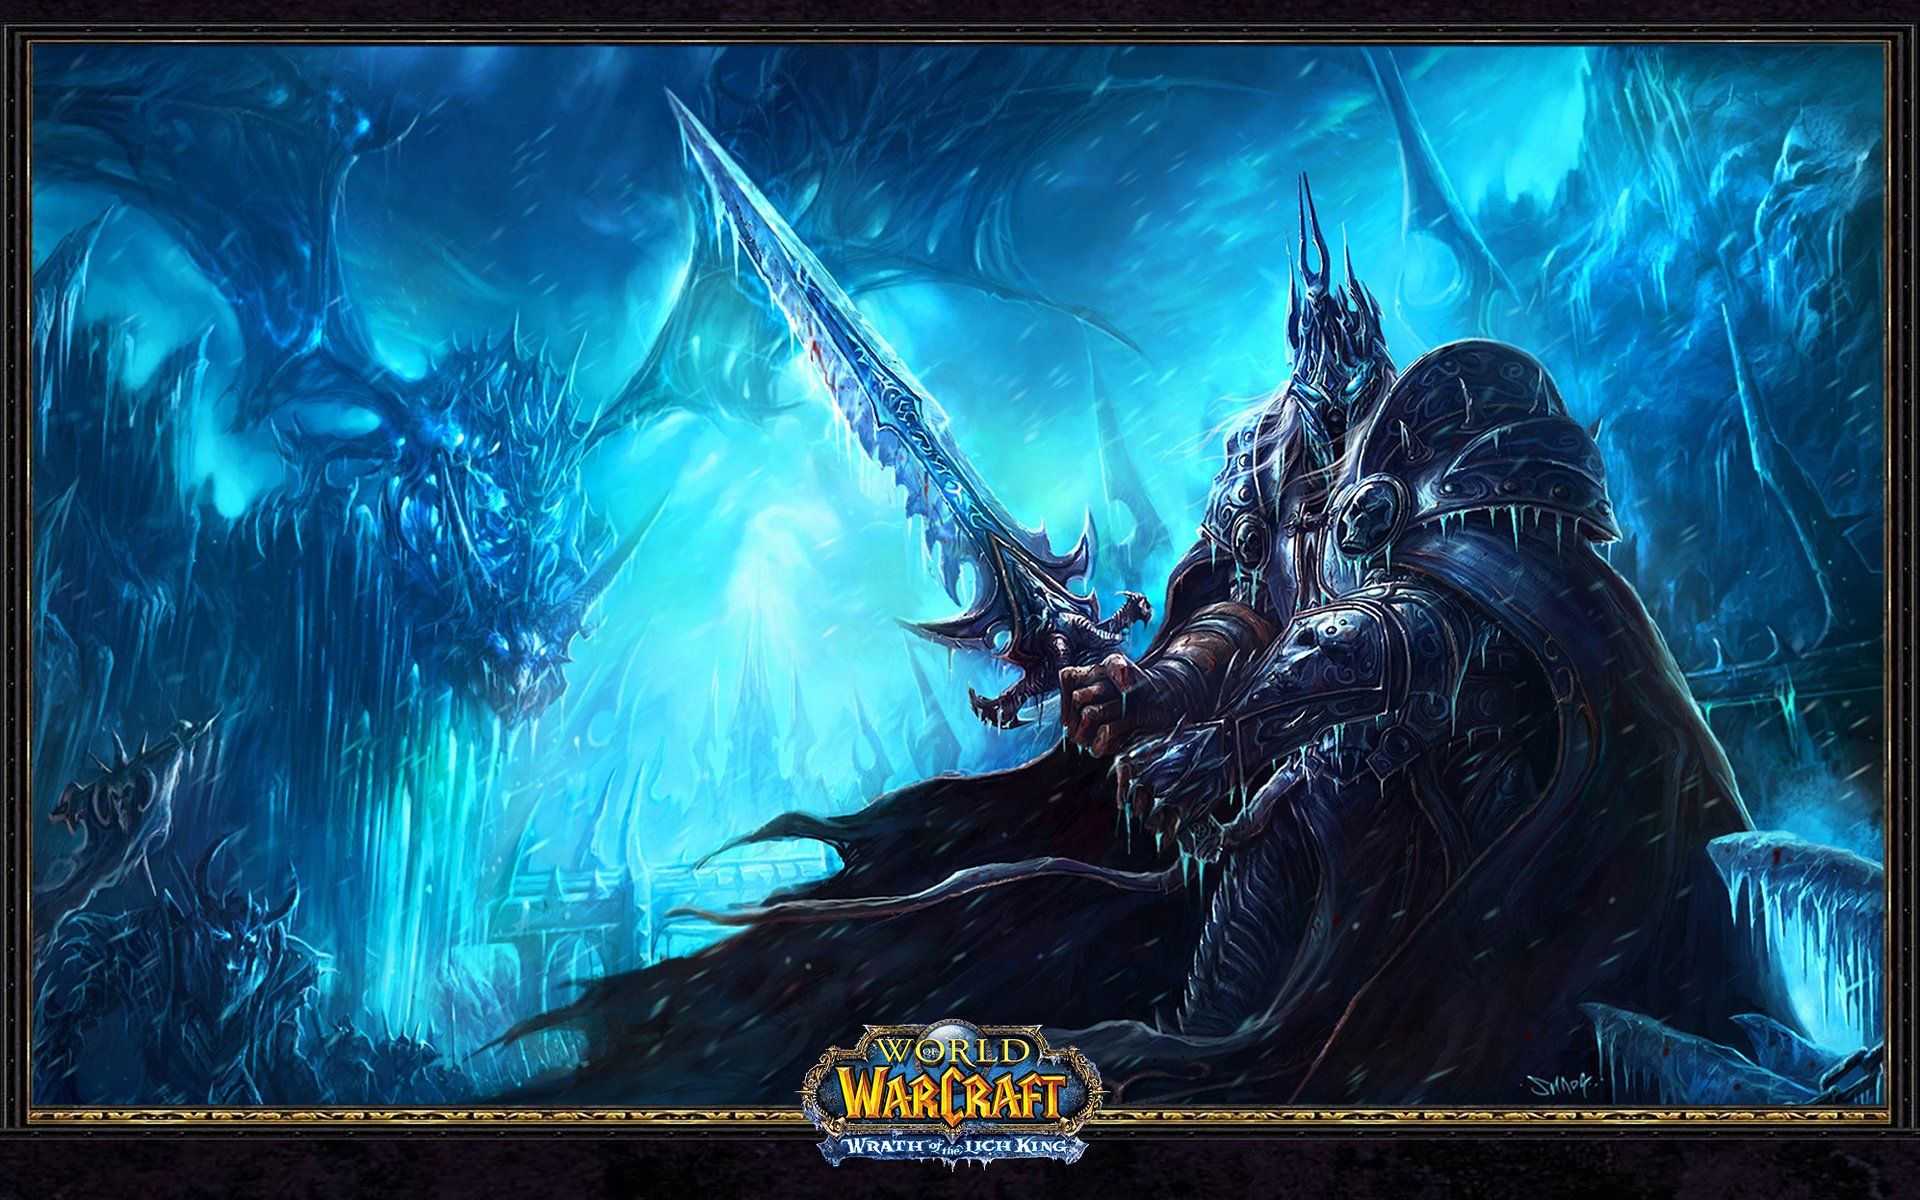 World of WarCraft Wrath of the Lich King PC - Games Wallpaper